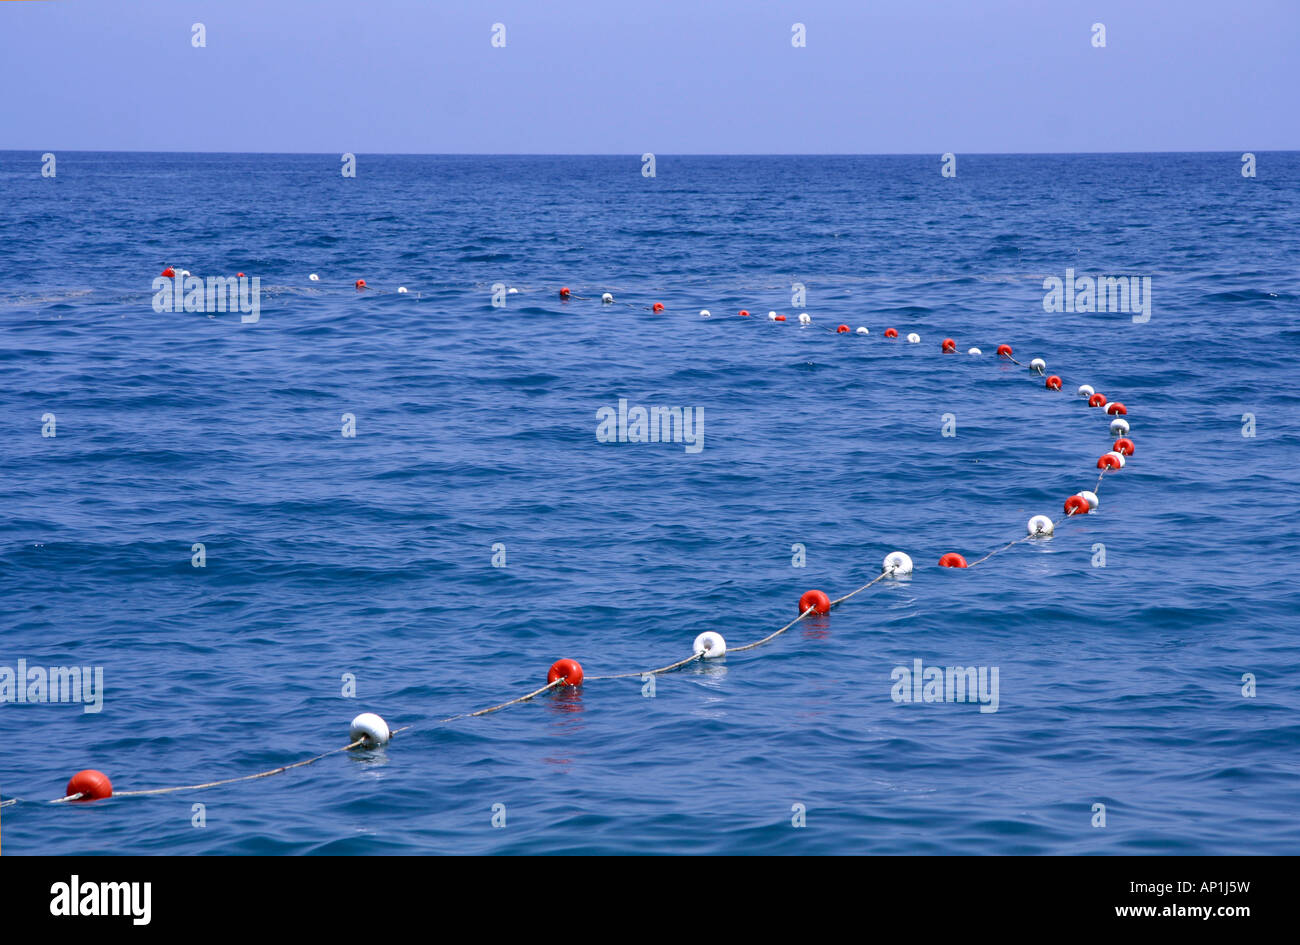 https://c8.alamy.com/comp/AP1J5W/red-and-white-fishing-line-floaters-in-sea-AP1J5W.jpg